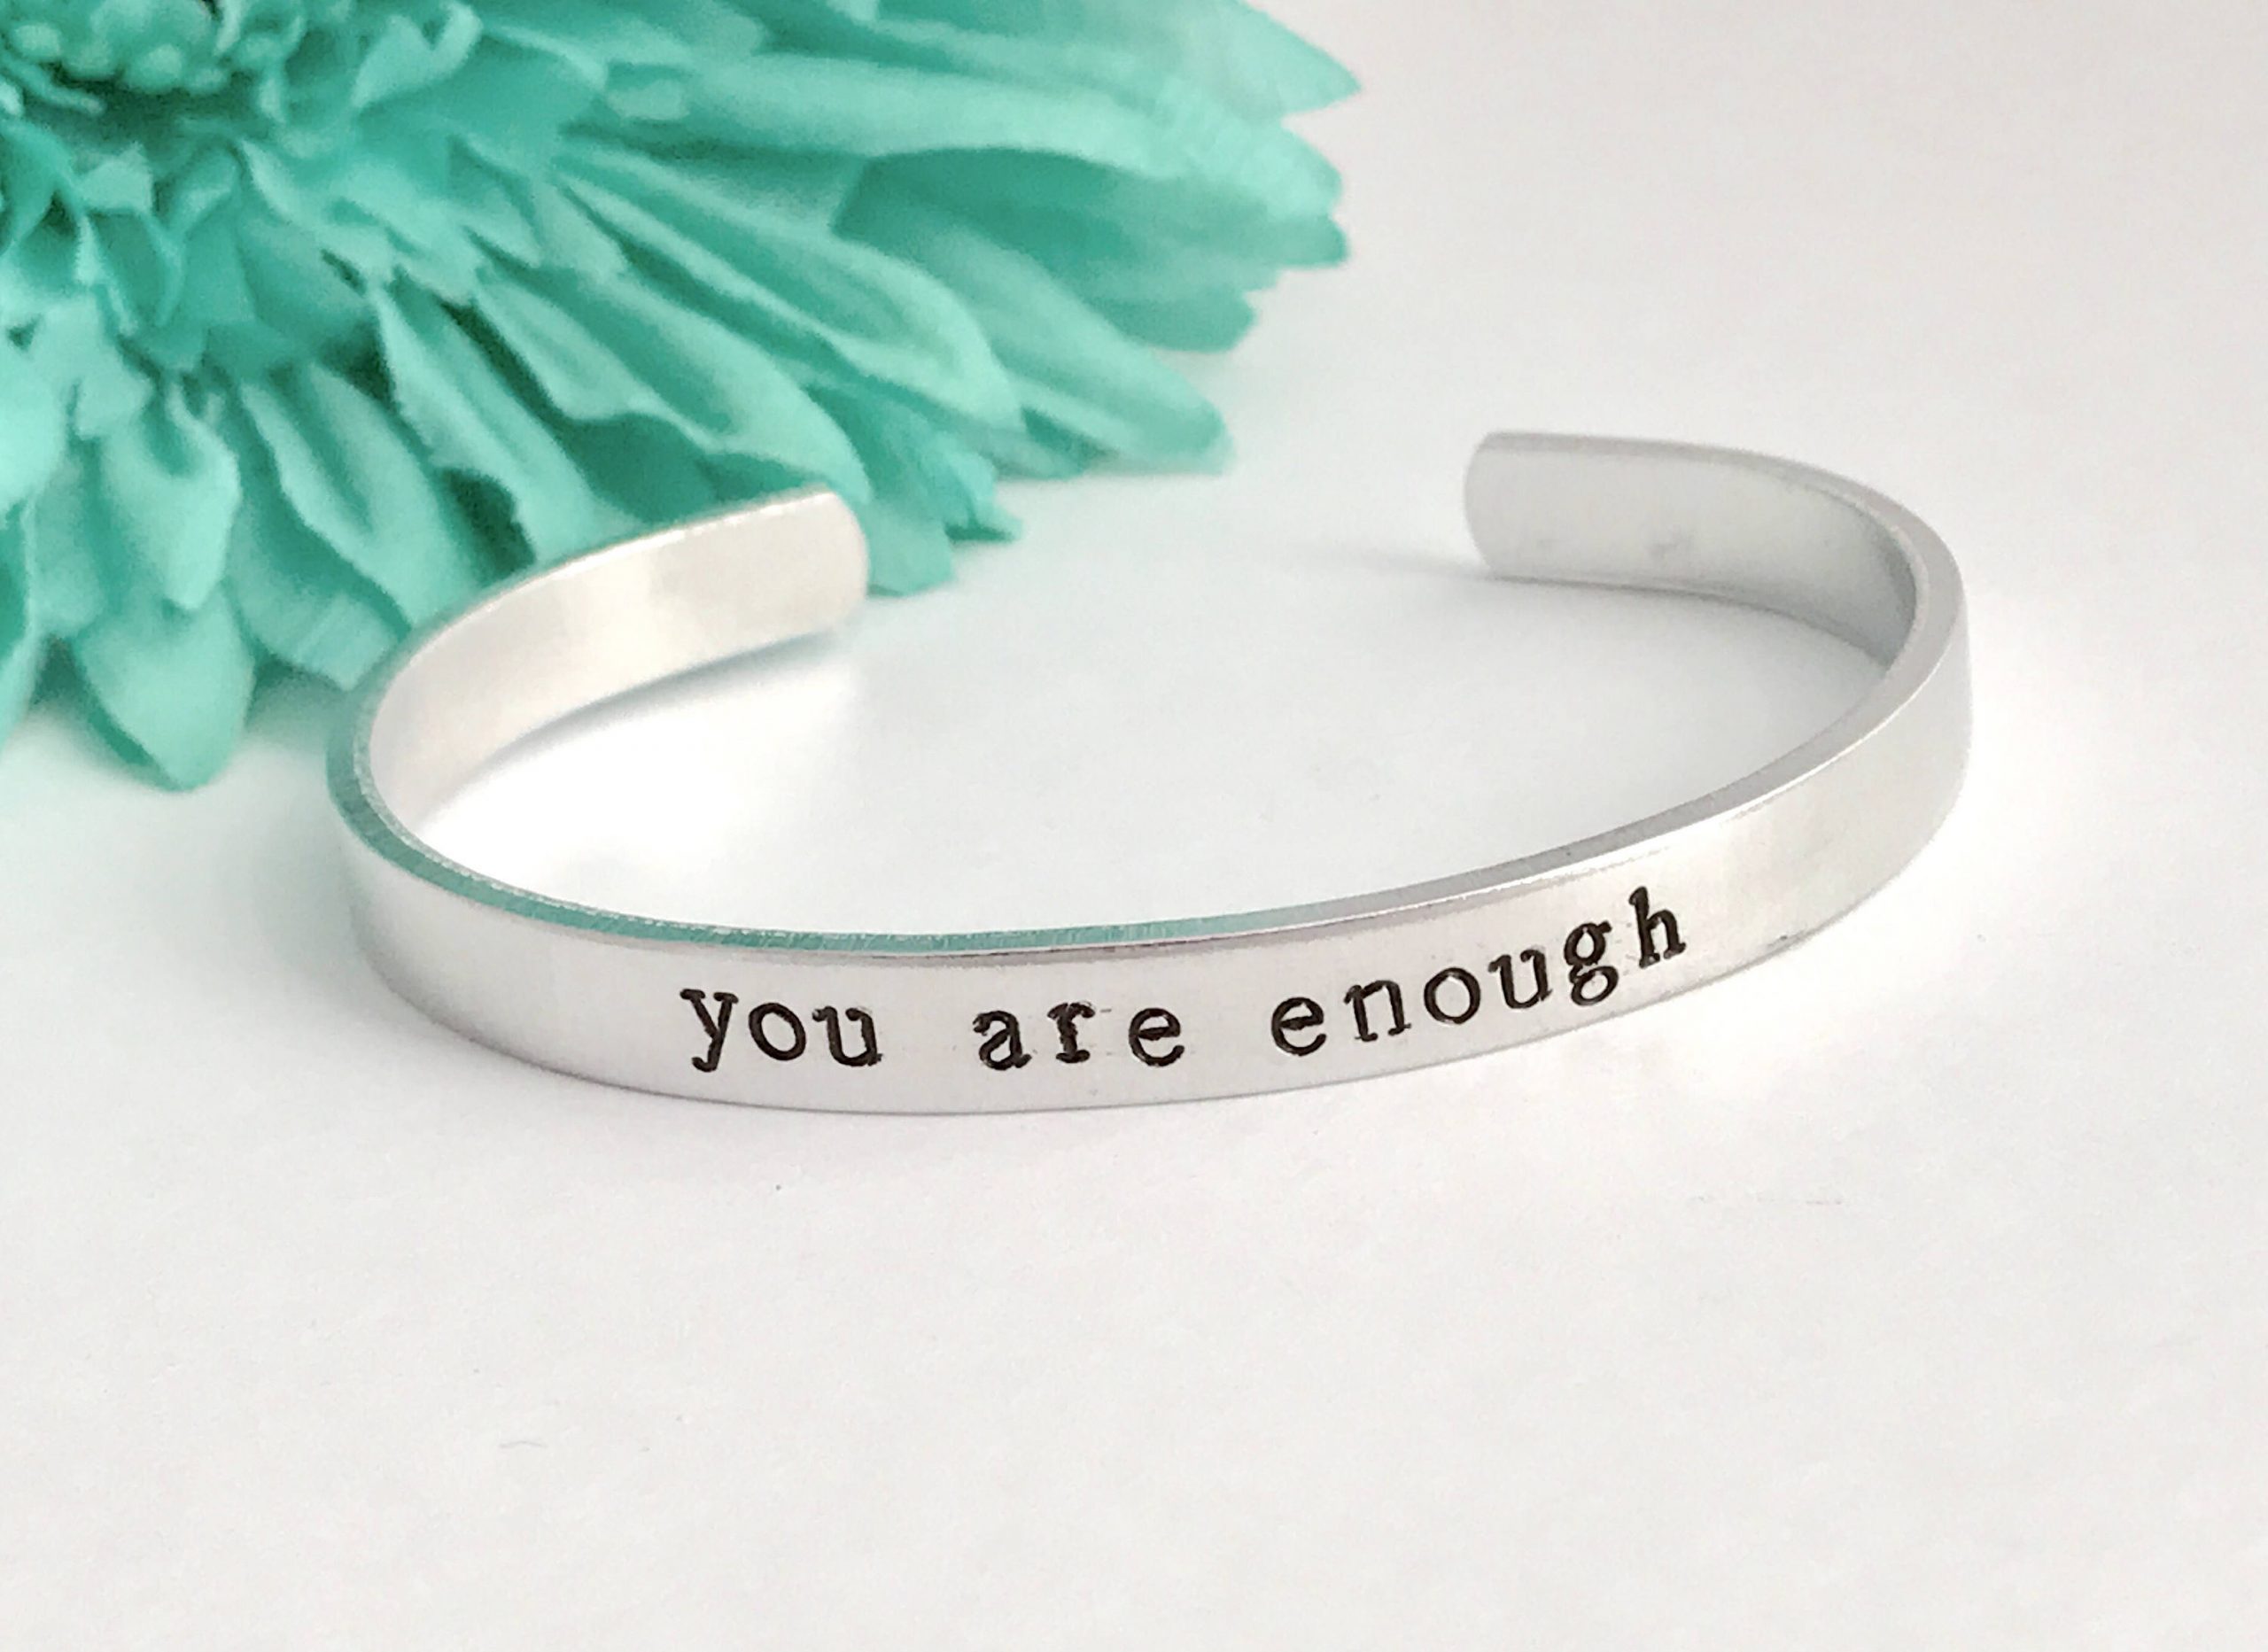 You are enough – cuff bracelet inspirational stamped saying – Hand ...